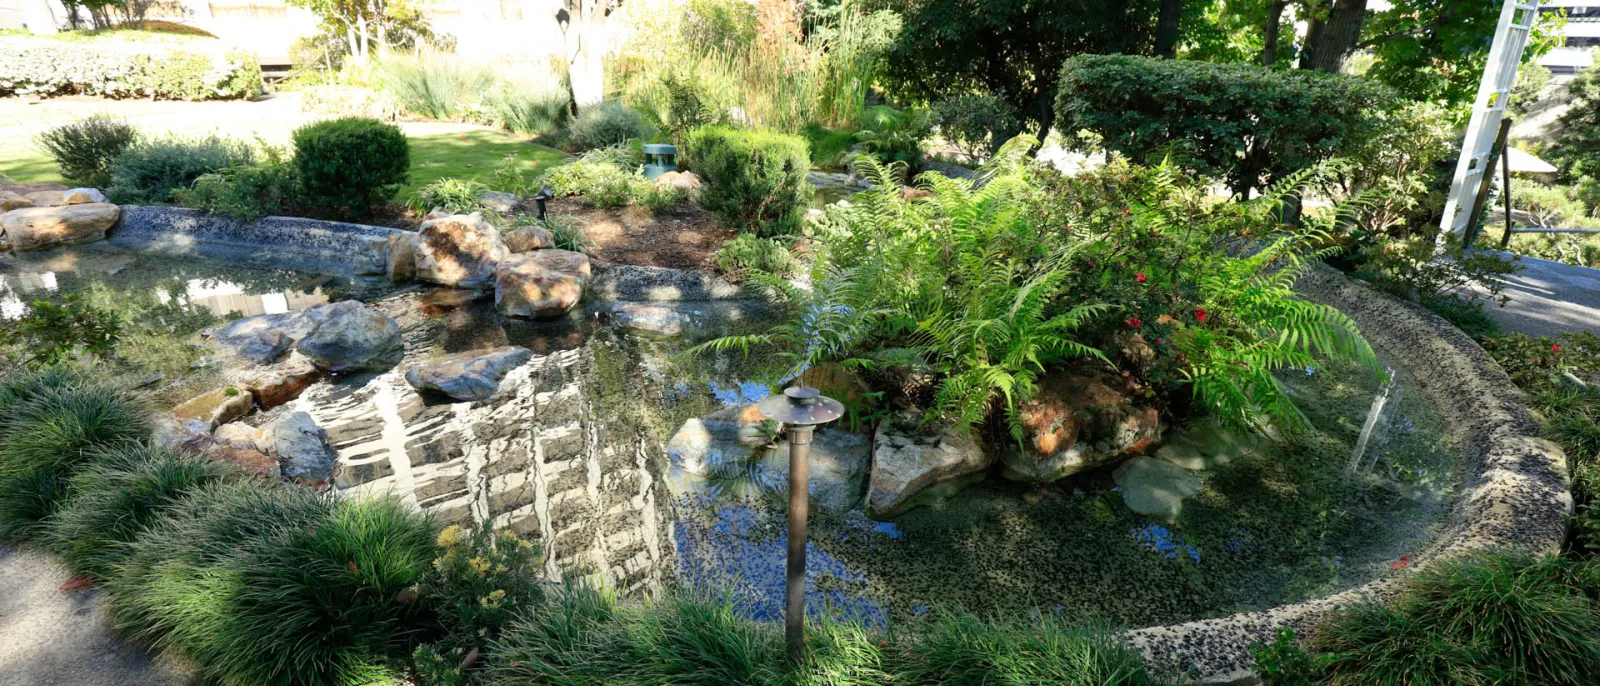 5 La Hidden Gardens You Need To Find Now Discover Los Angeles